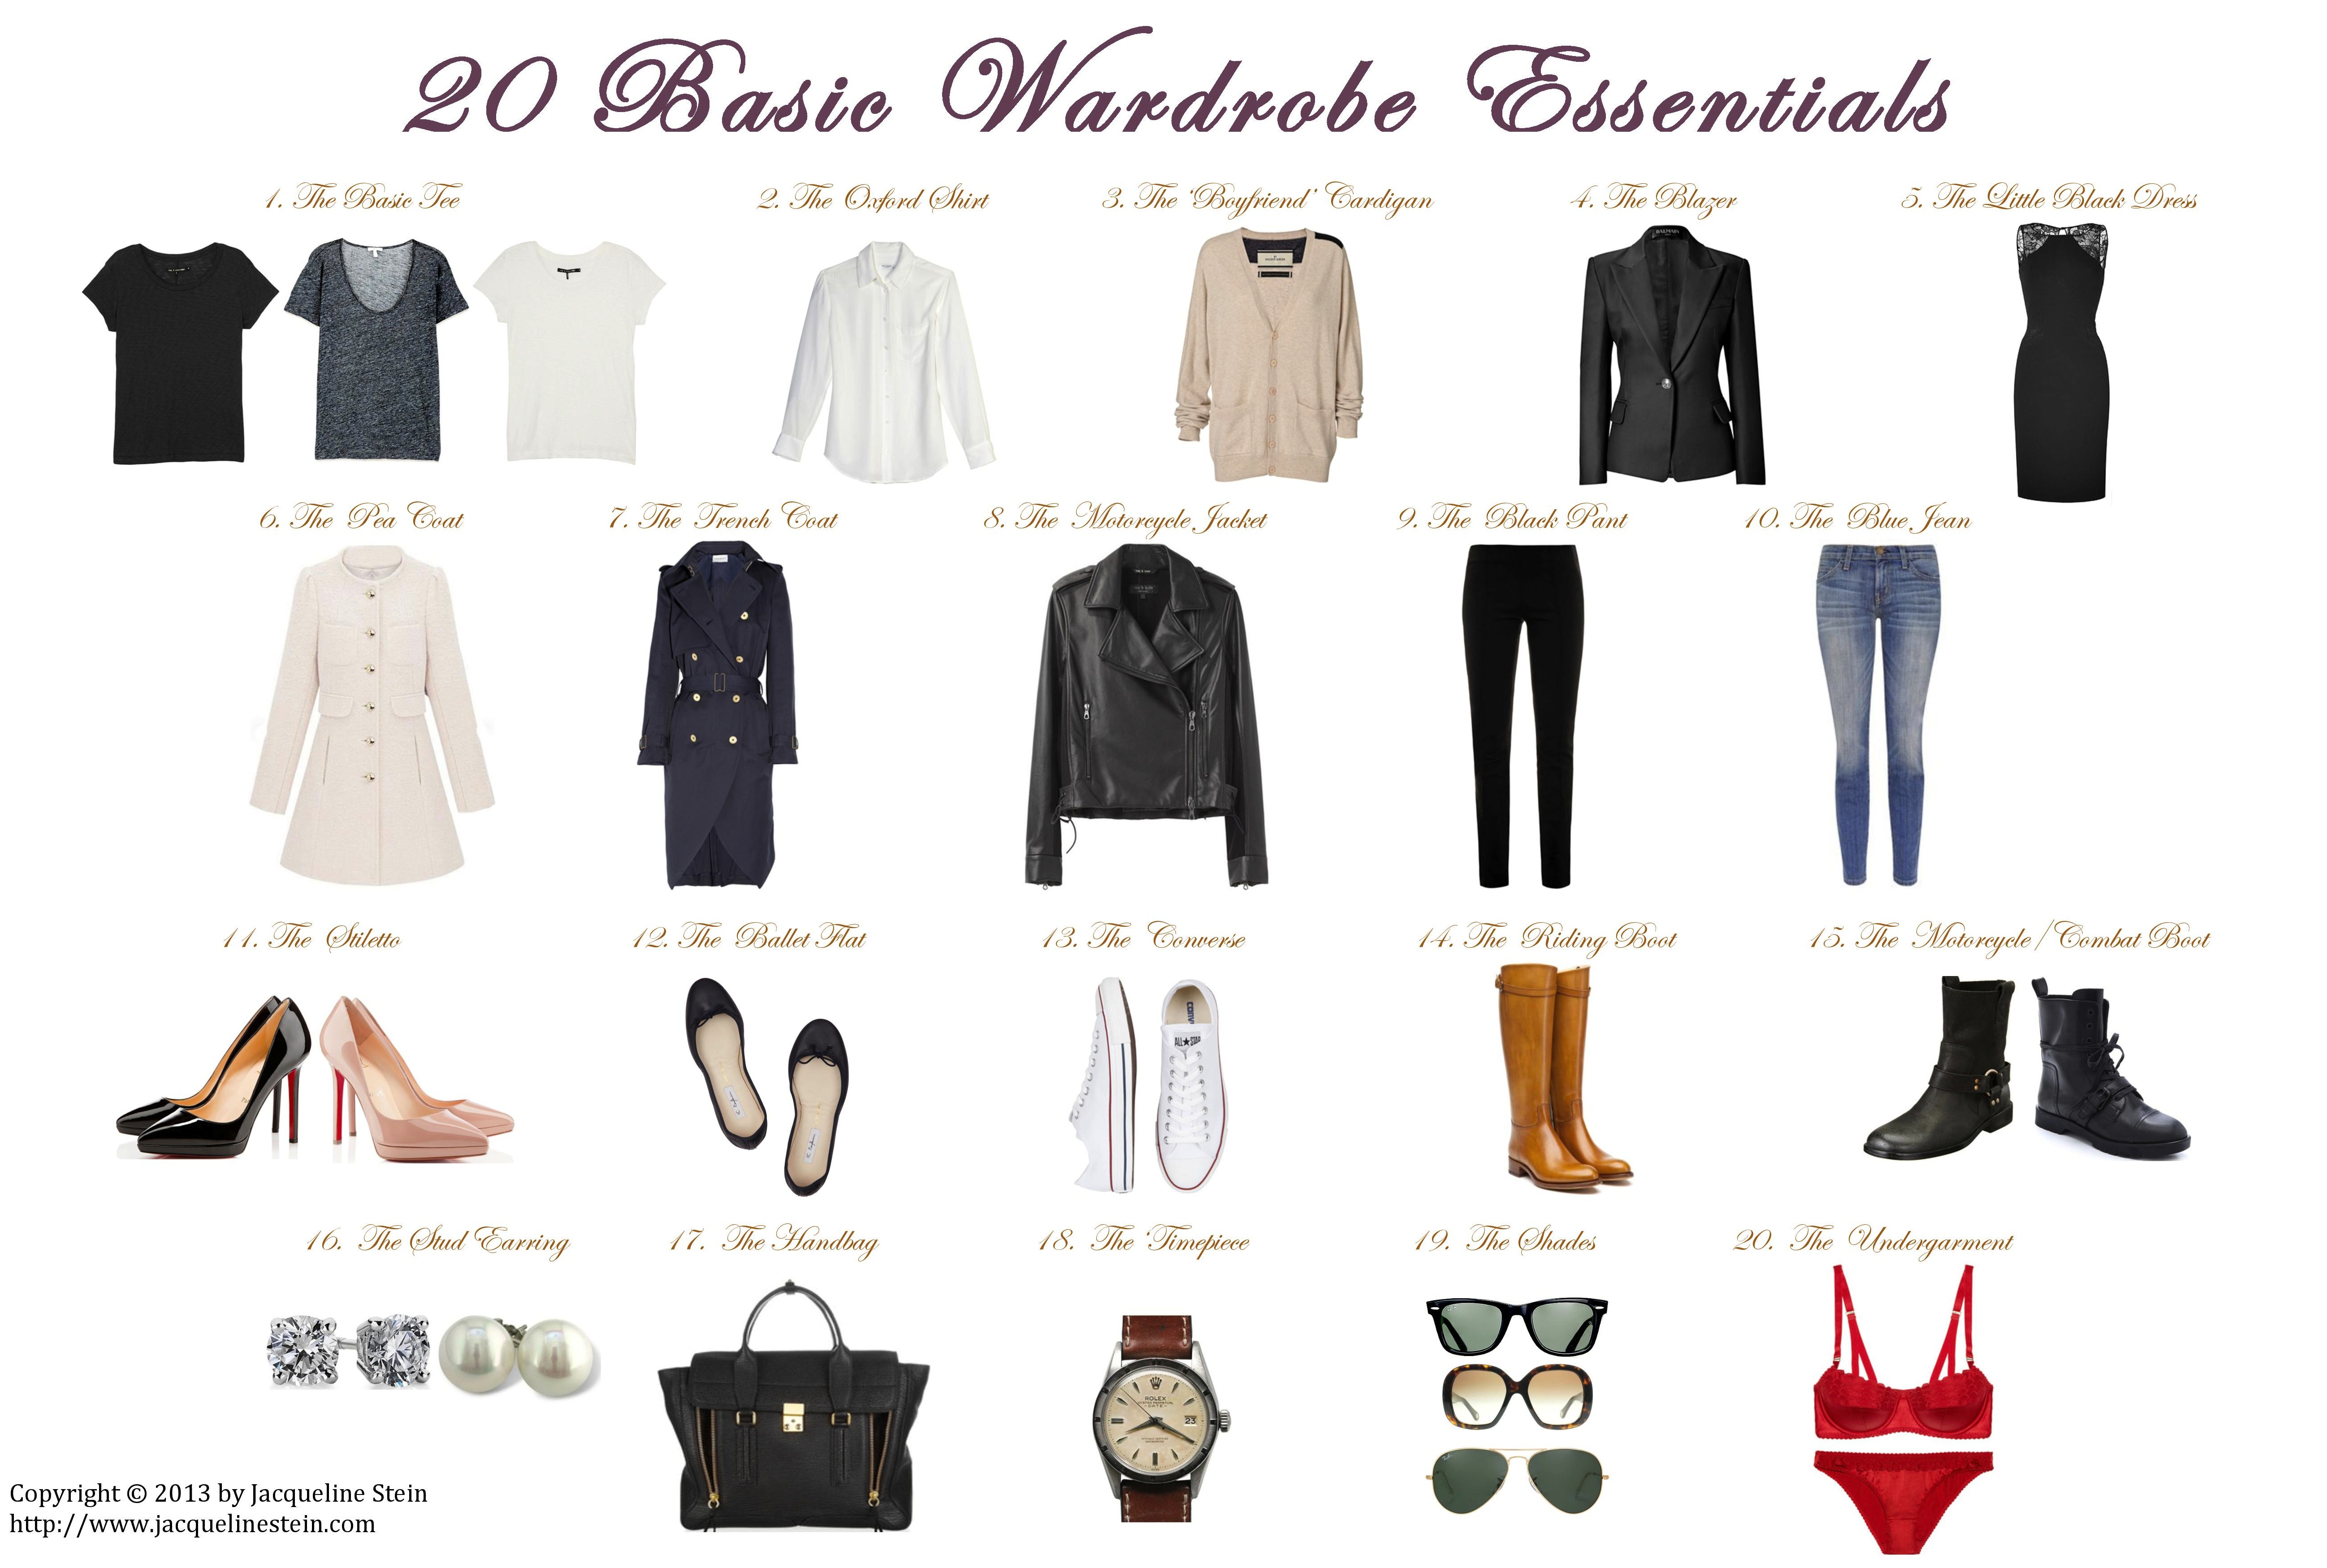 Completing a Basic Wardrobe